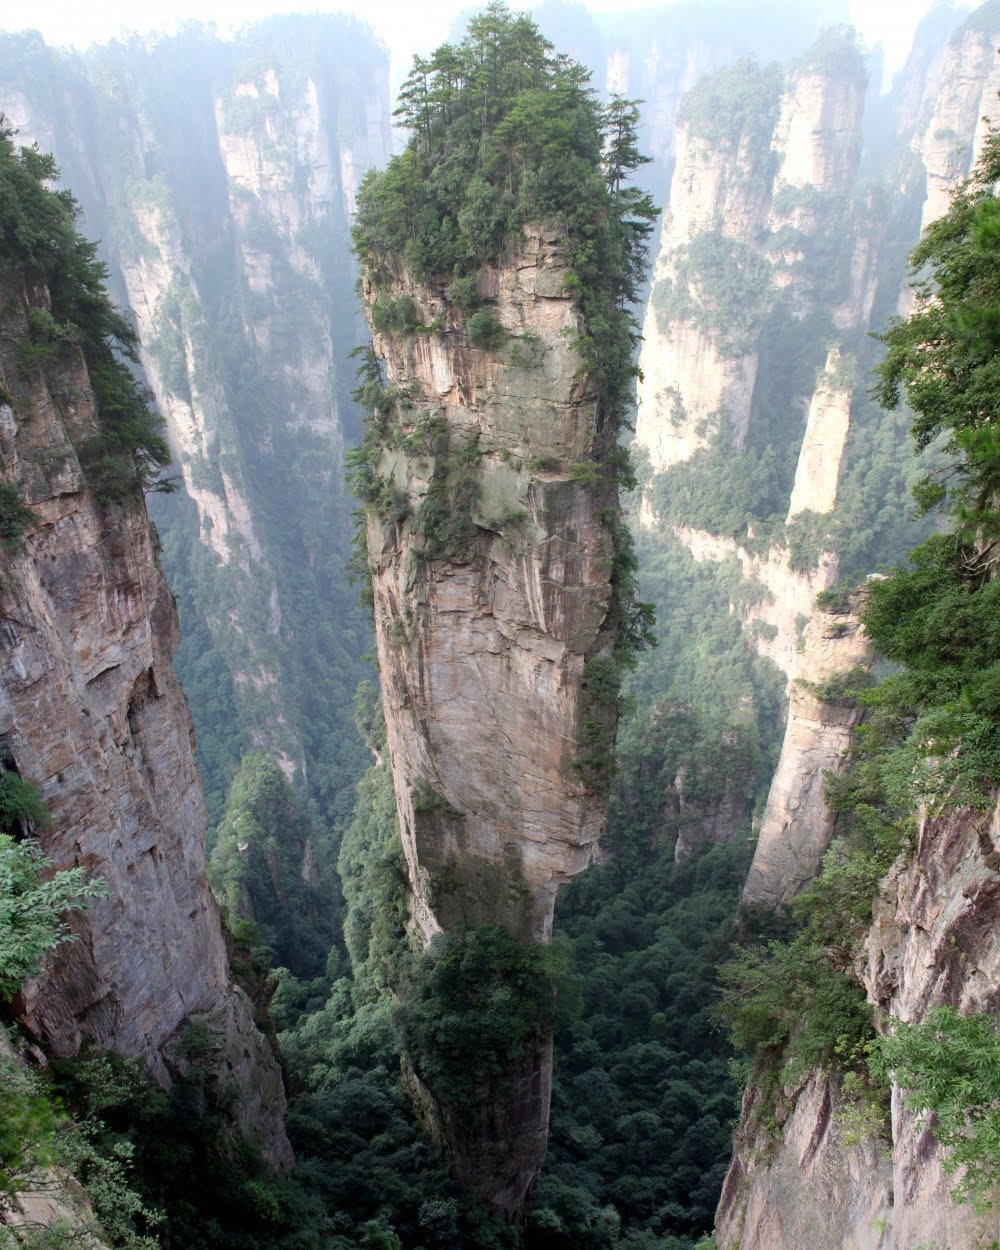 tianzi-mountain-china-inspiration-for-the-landscapes-of-pandora-in-avatar